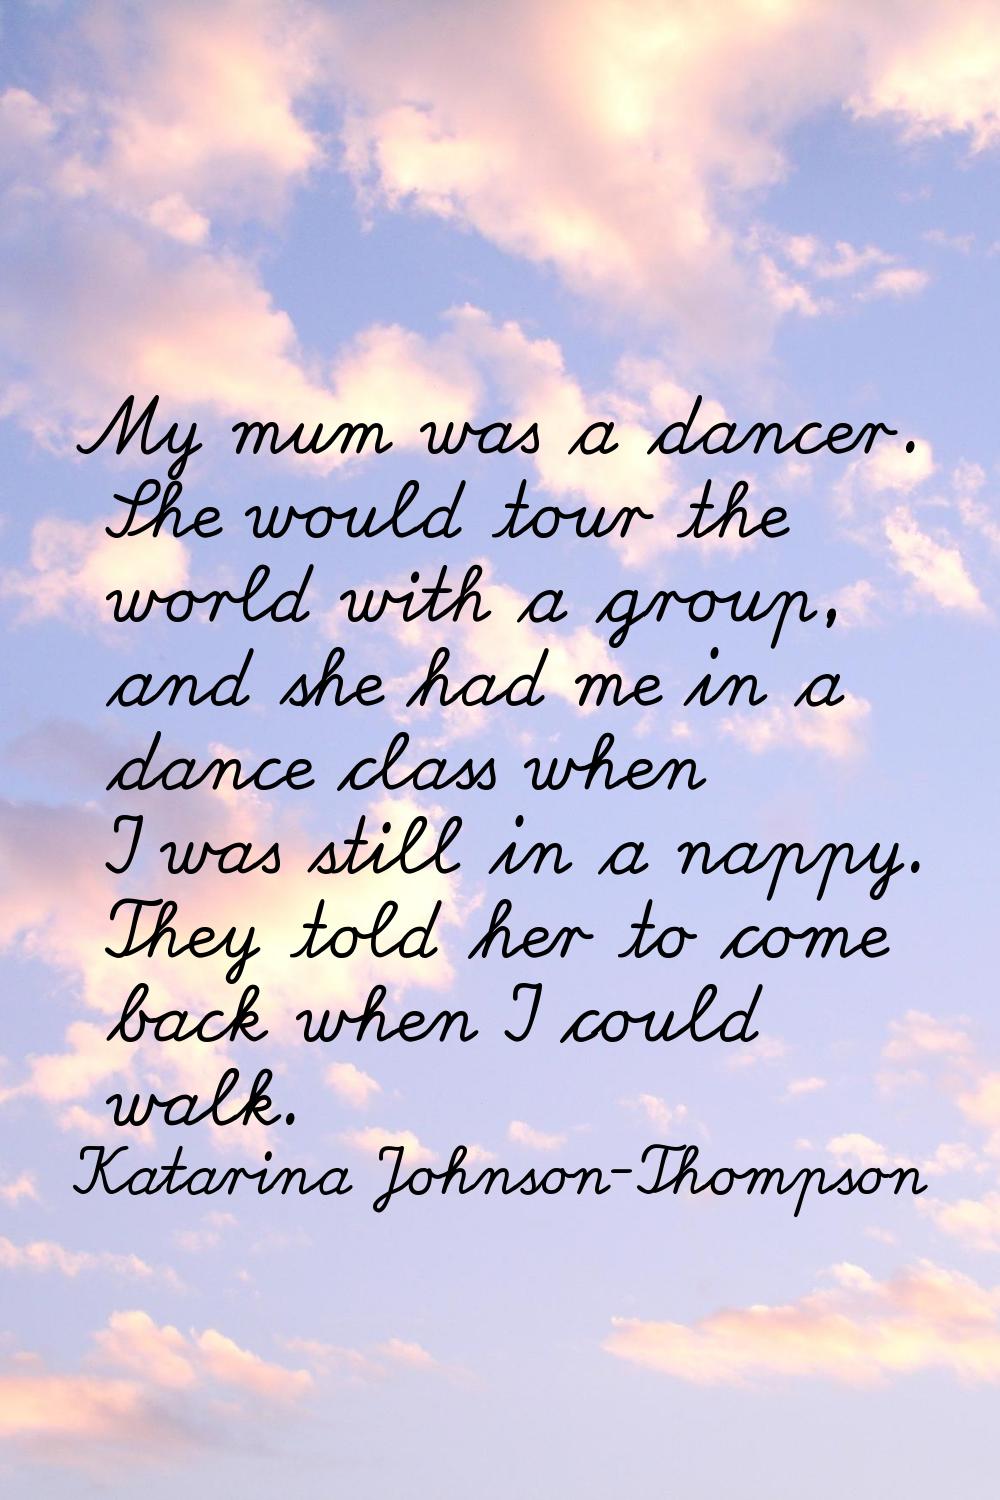 My mum was a dancer. She would tour the world with a group, and she had me in a dance class when I 